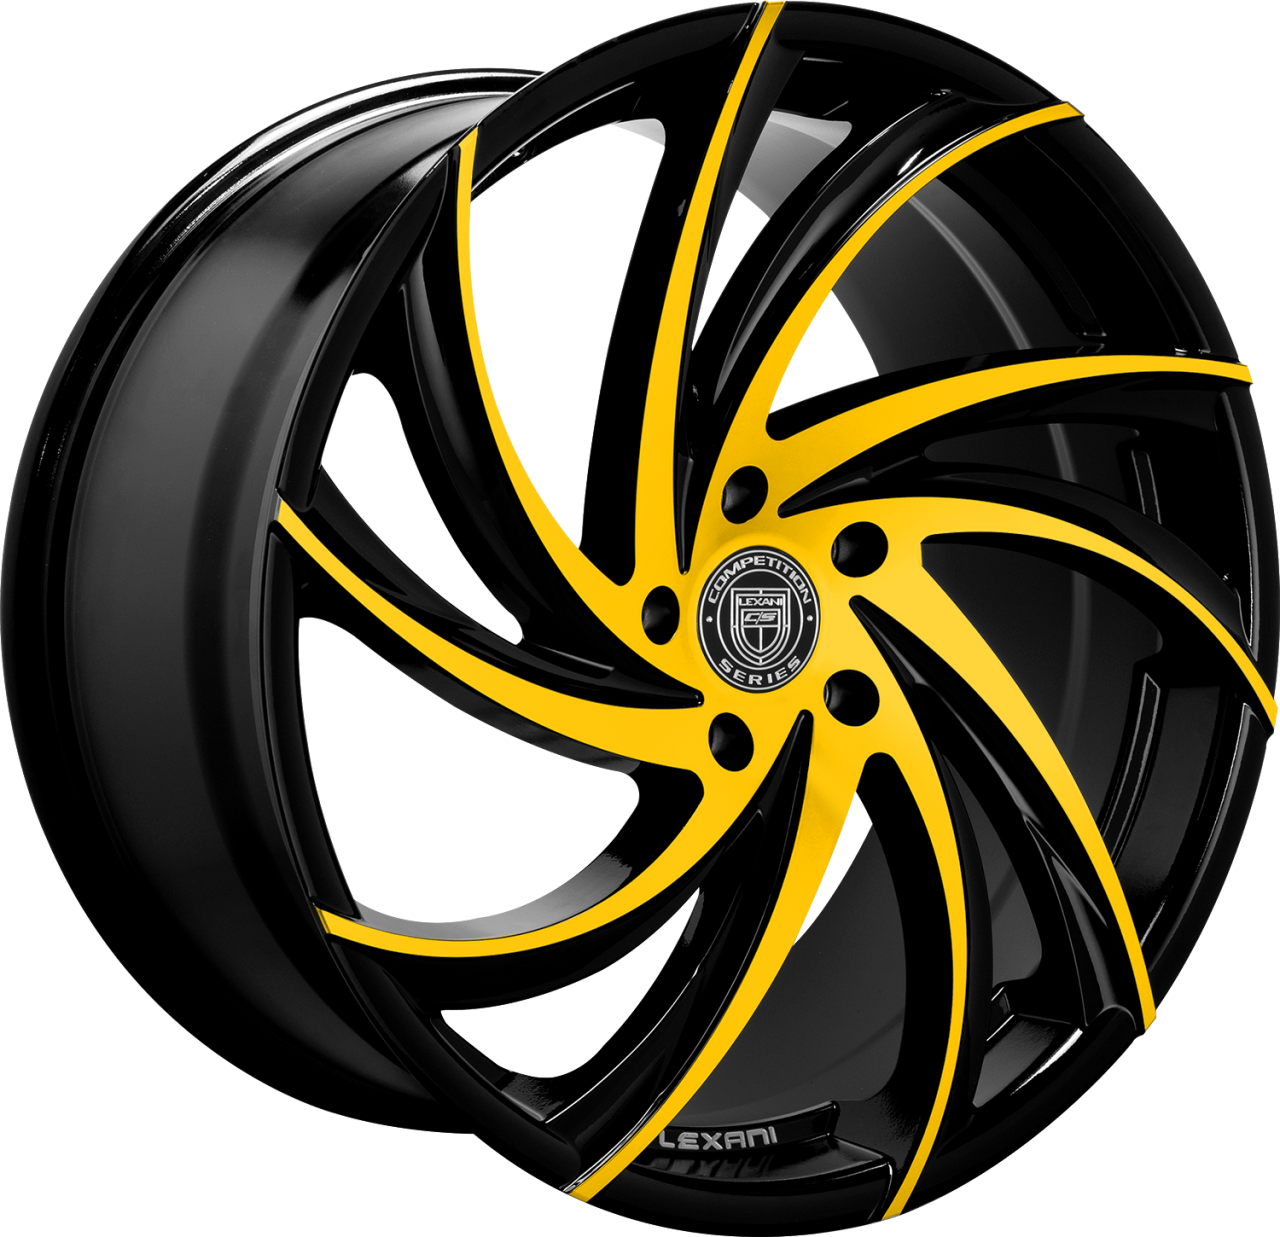 Artis Forged Twister wheel with Black and Yellow finish